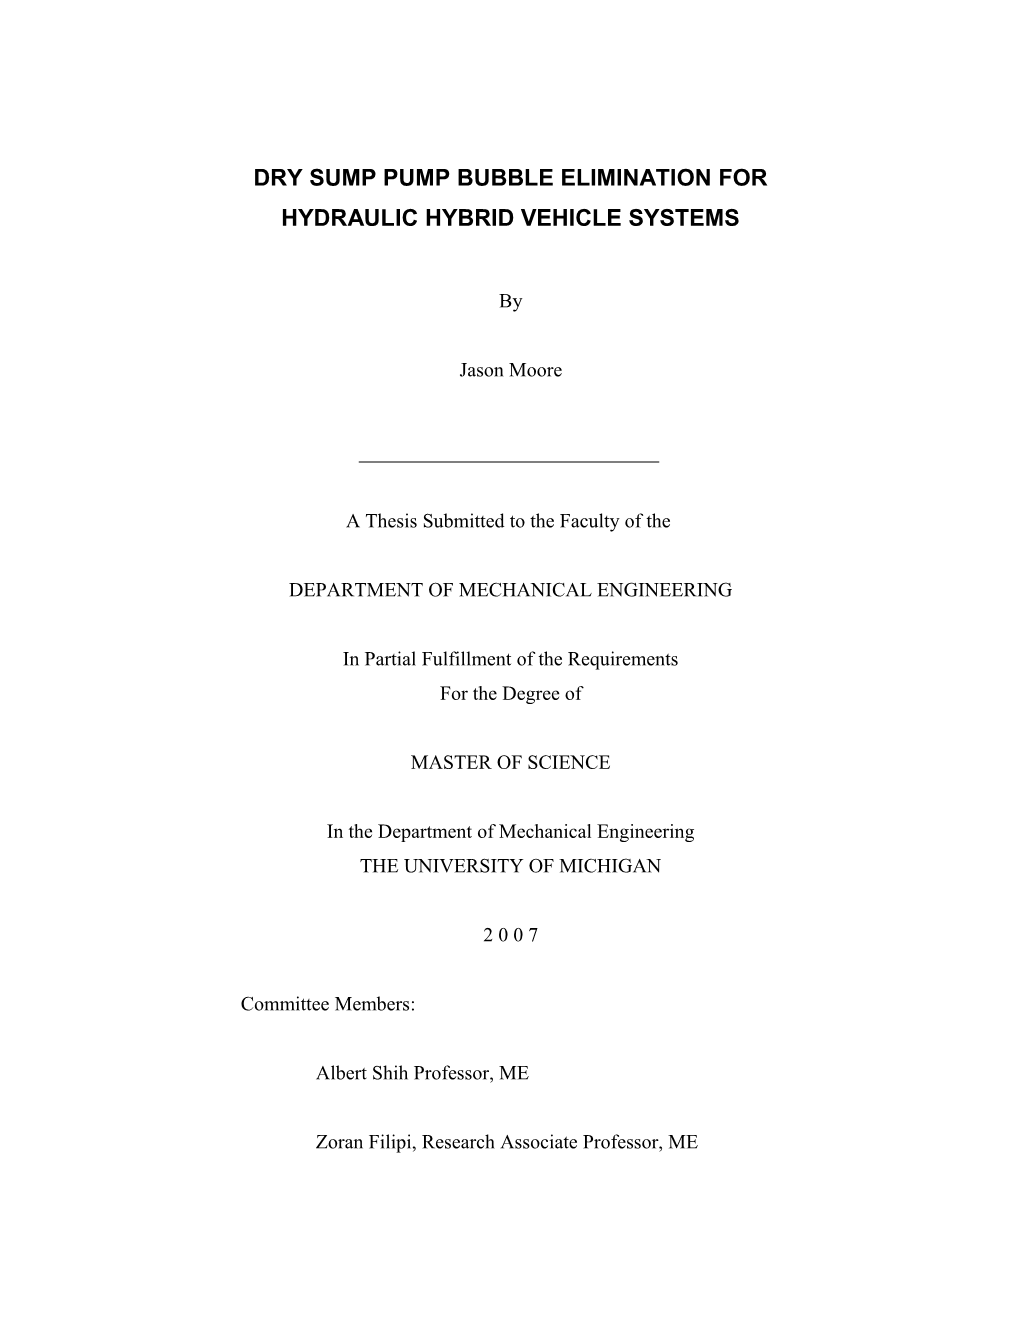 Dry Sump Pump Bubble Elimination for Hydraulic Hybrid Vehicle Systems